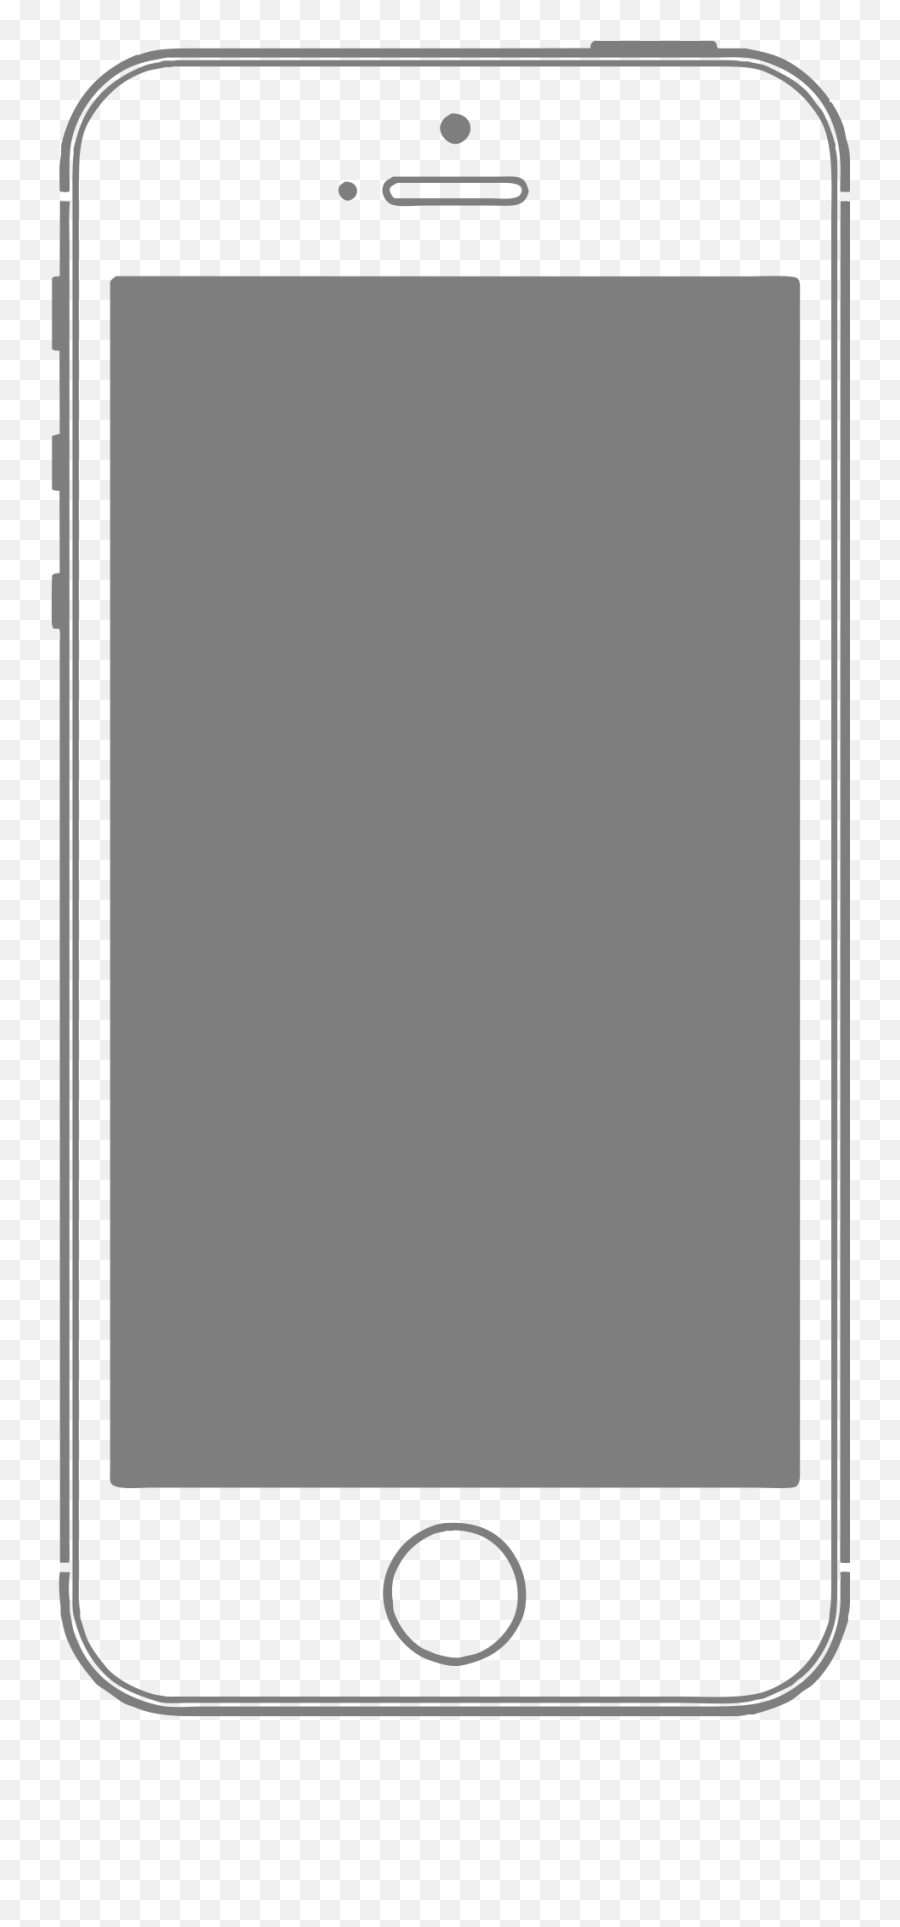 Hd Iphone Wireframe Png Image Free - Portable Emoji,Iphone Png